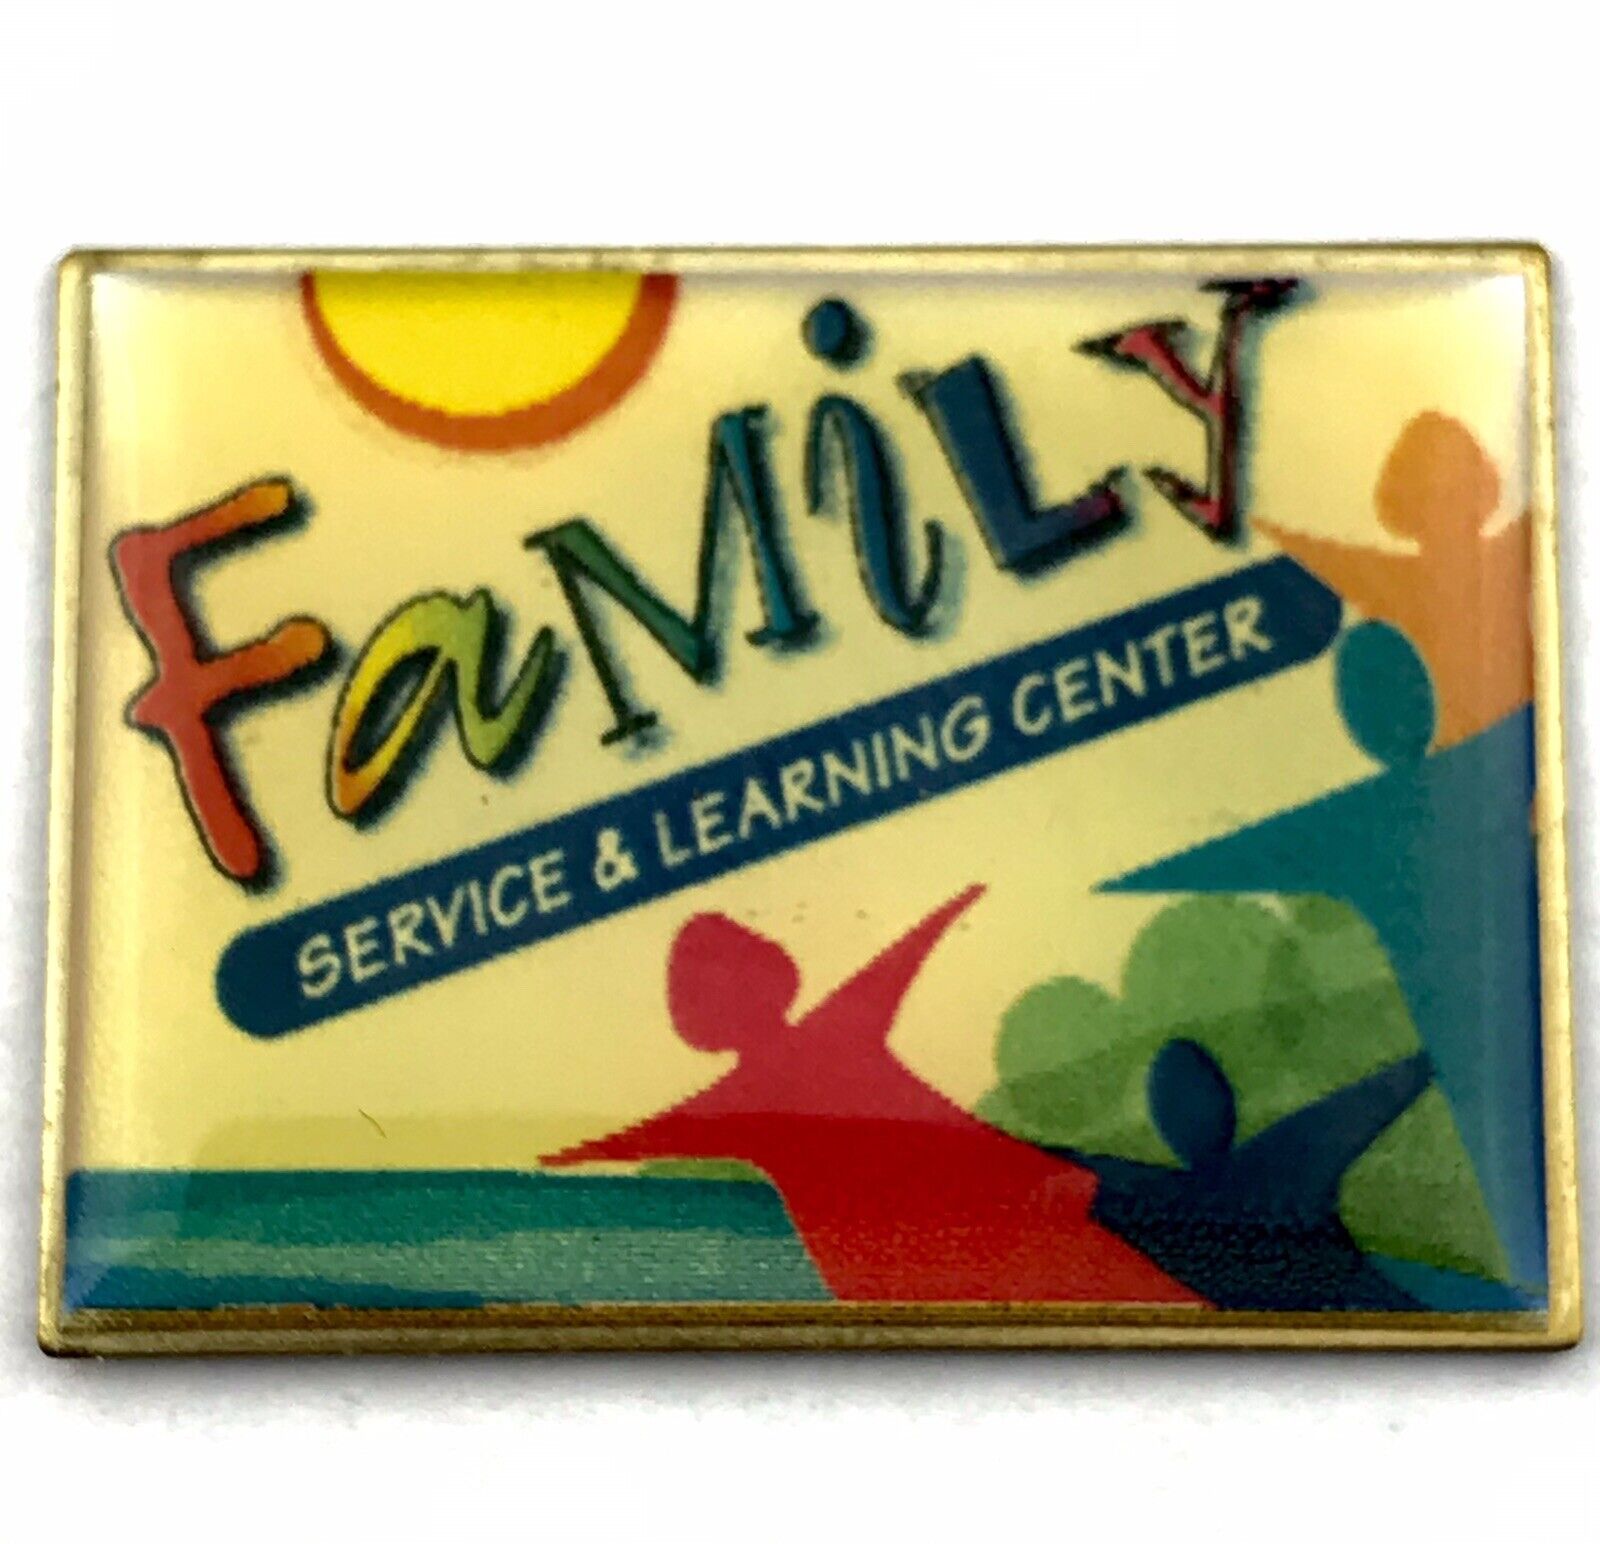 Family Service and Learning Center Vintage Brooch Pin